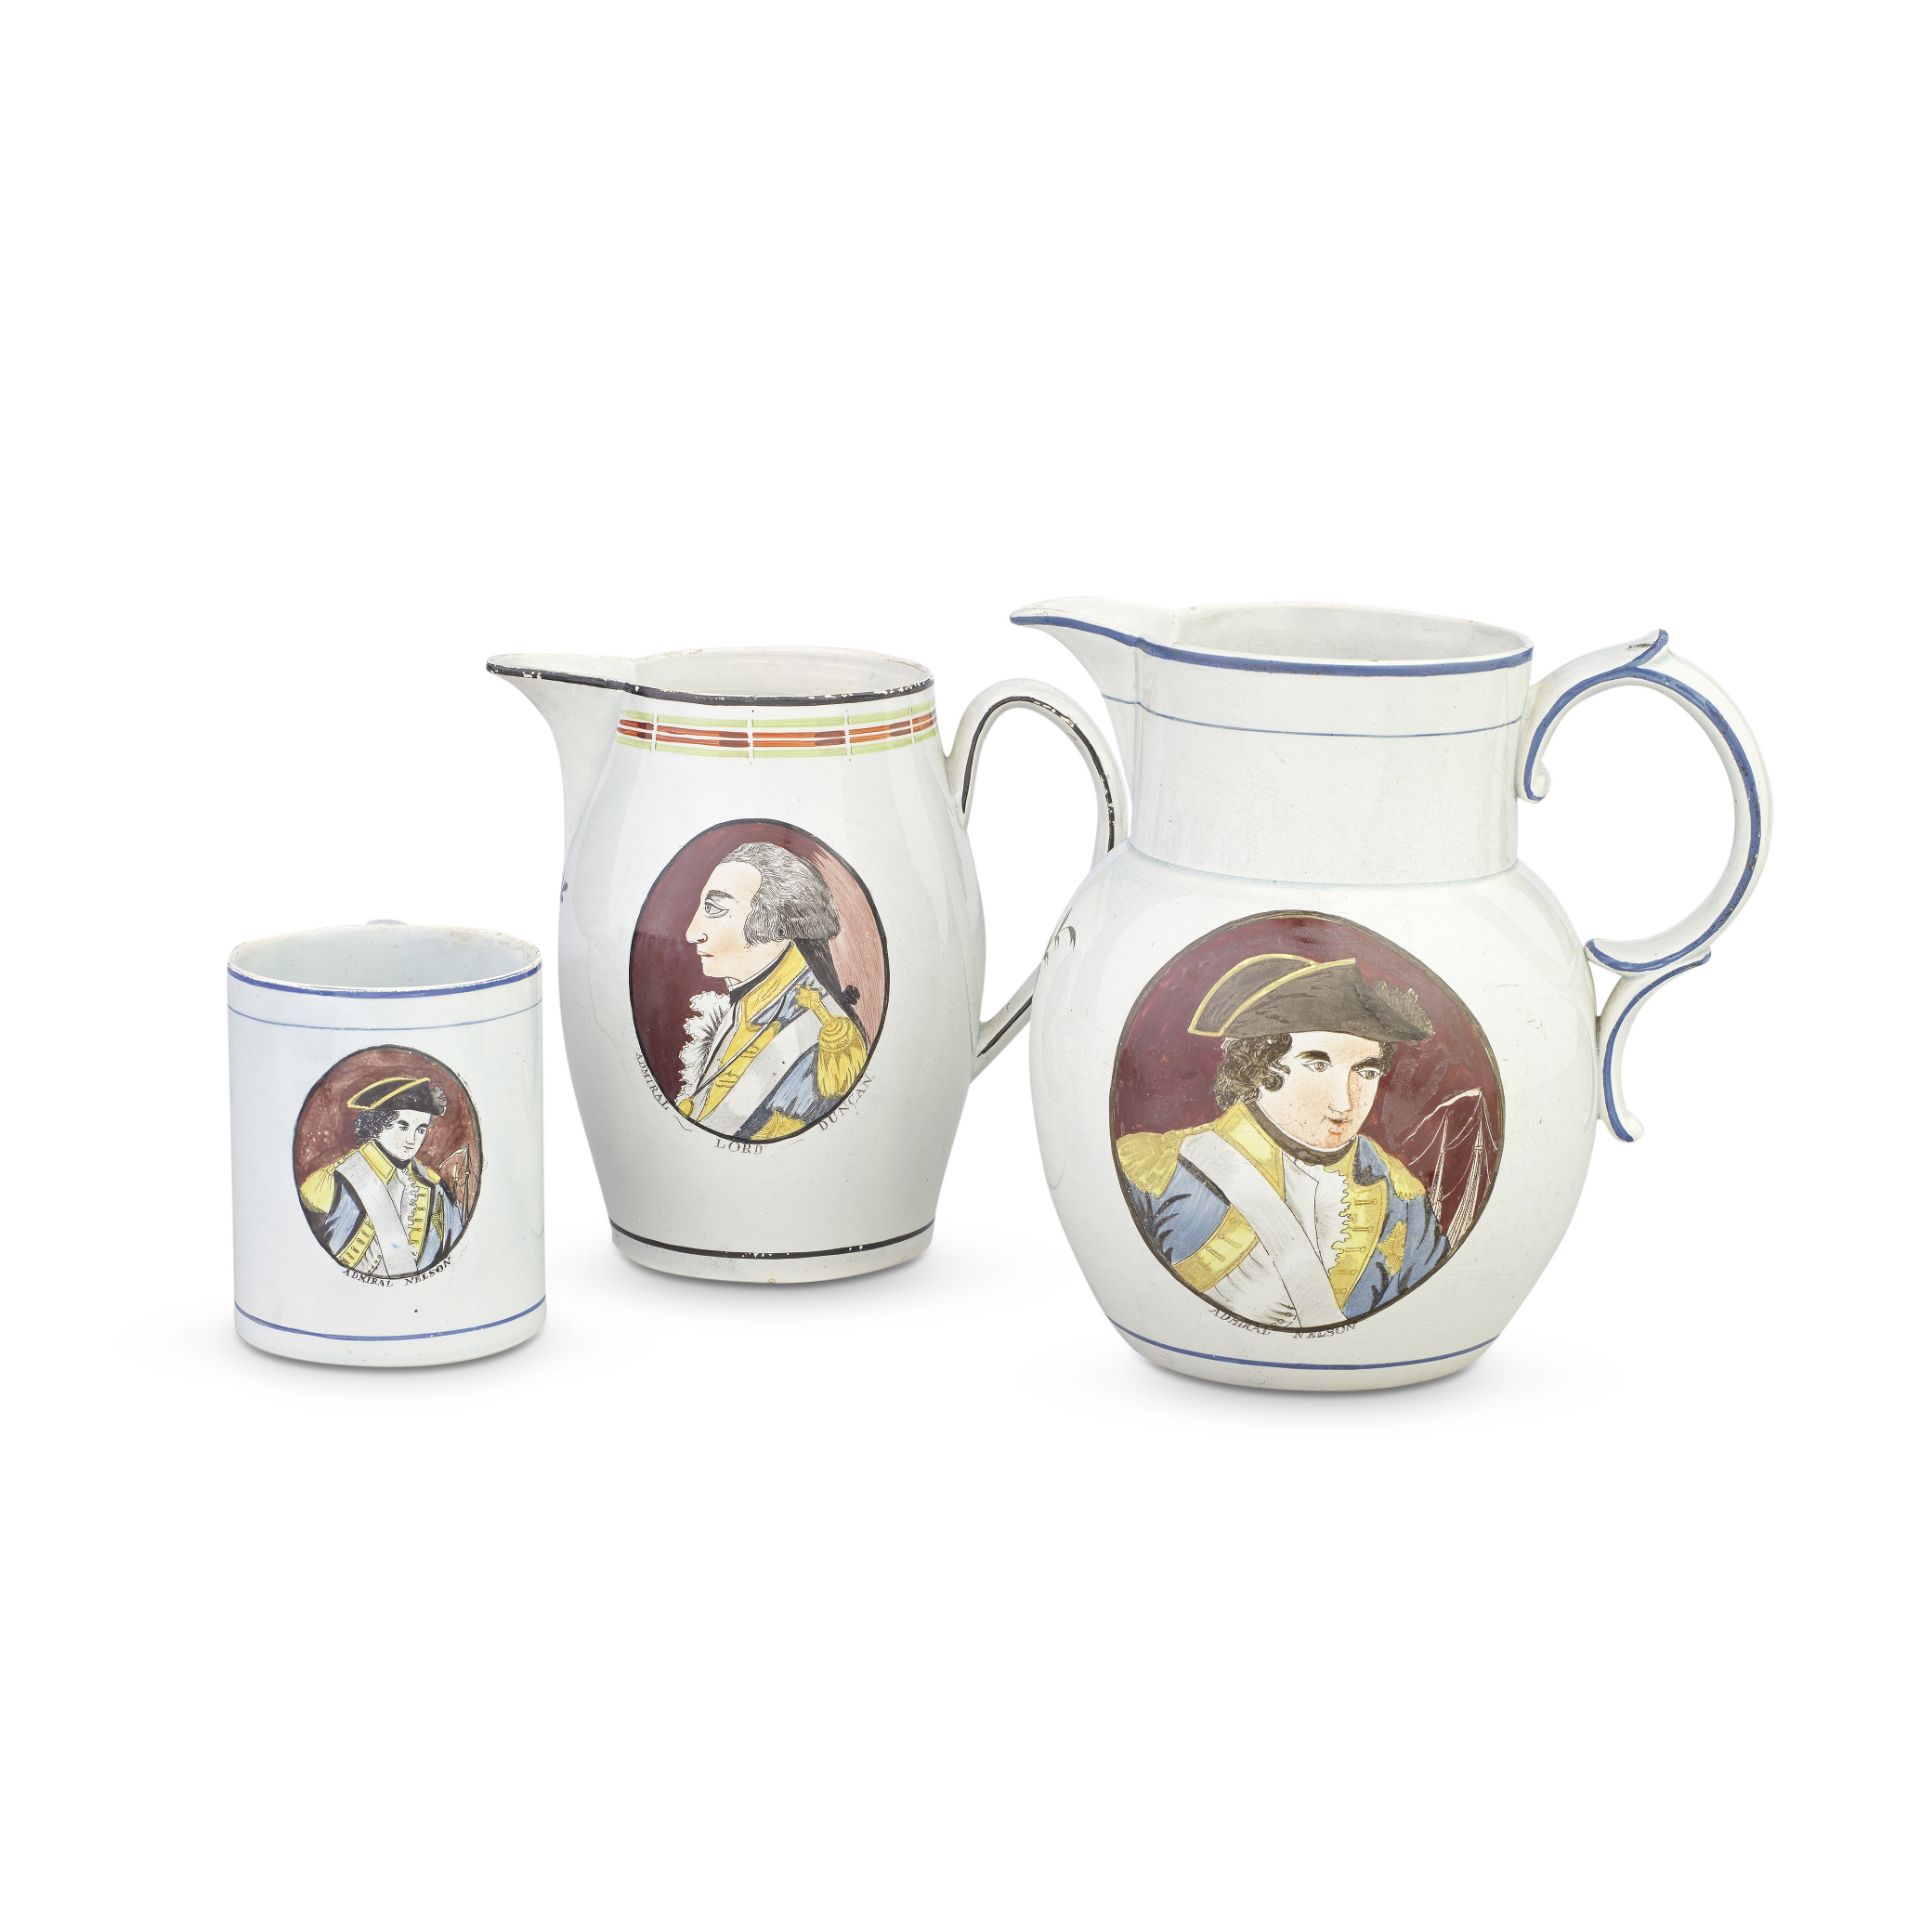 Nelson and Duncan: Two pearlware jugs and a mug, circa 1800